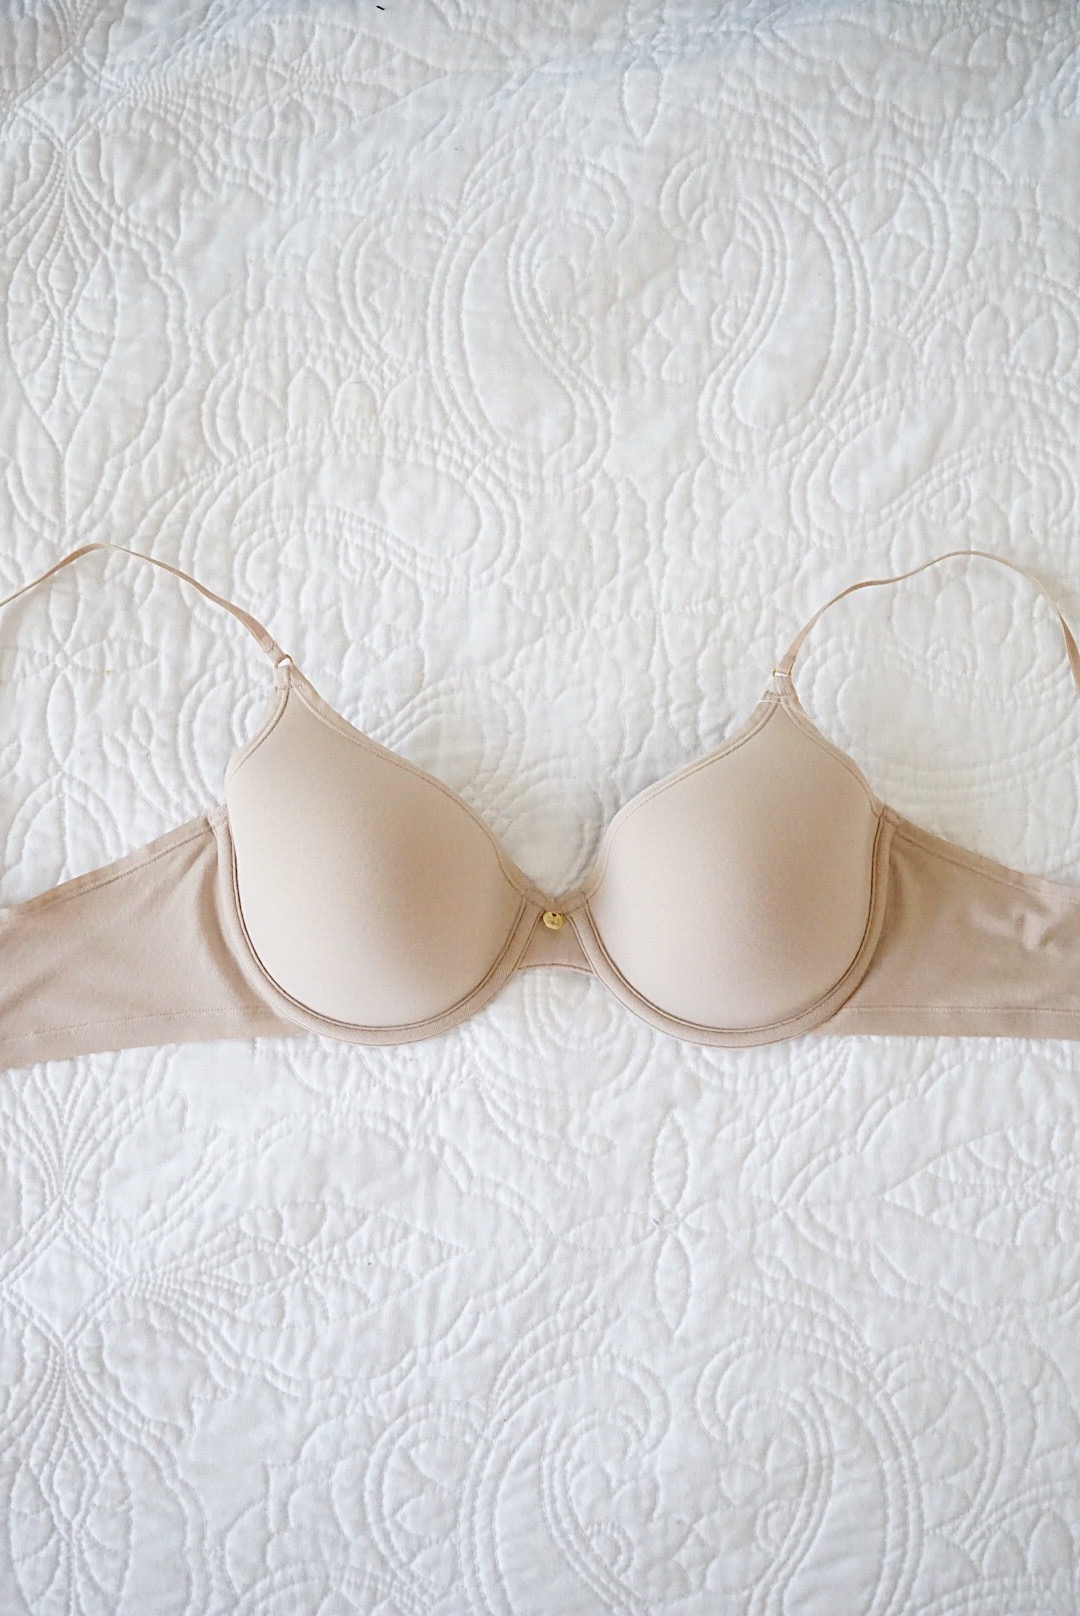 Best bras for everyday- The BEST Everyday Bra featured by popular Texas fashion blogger Style Your Senses